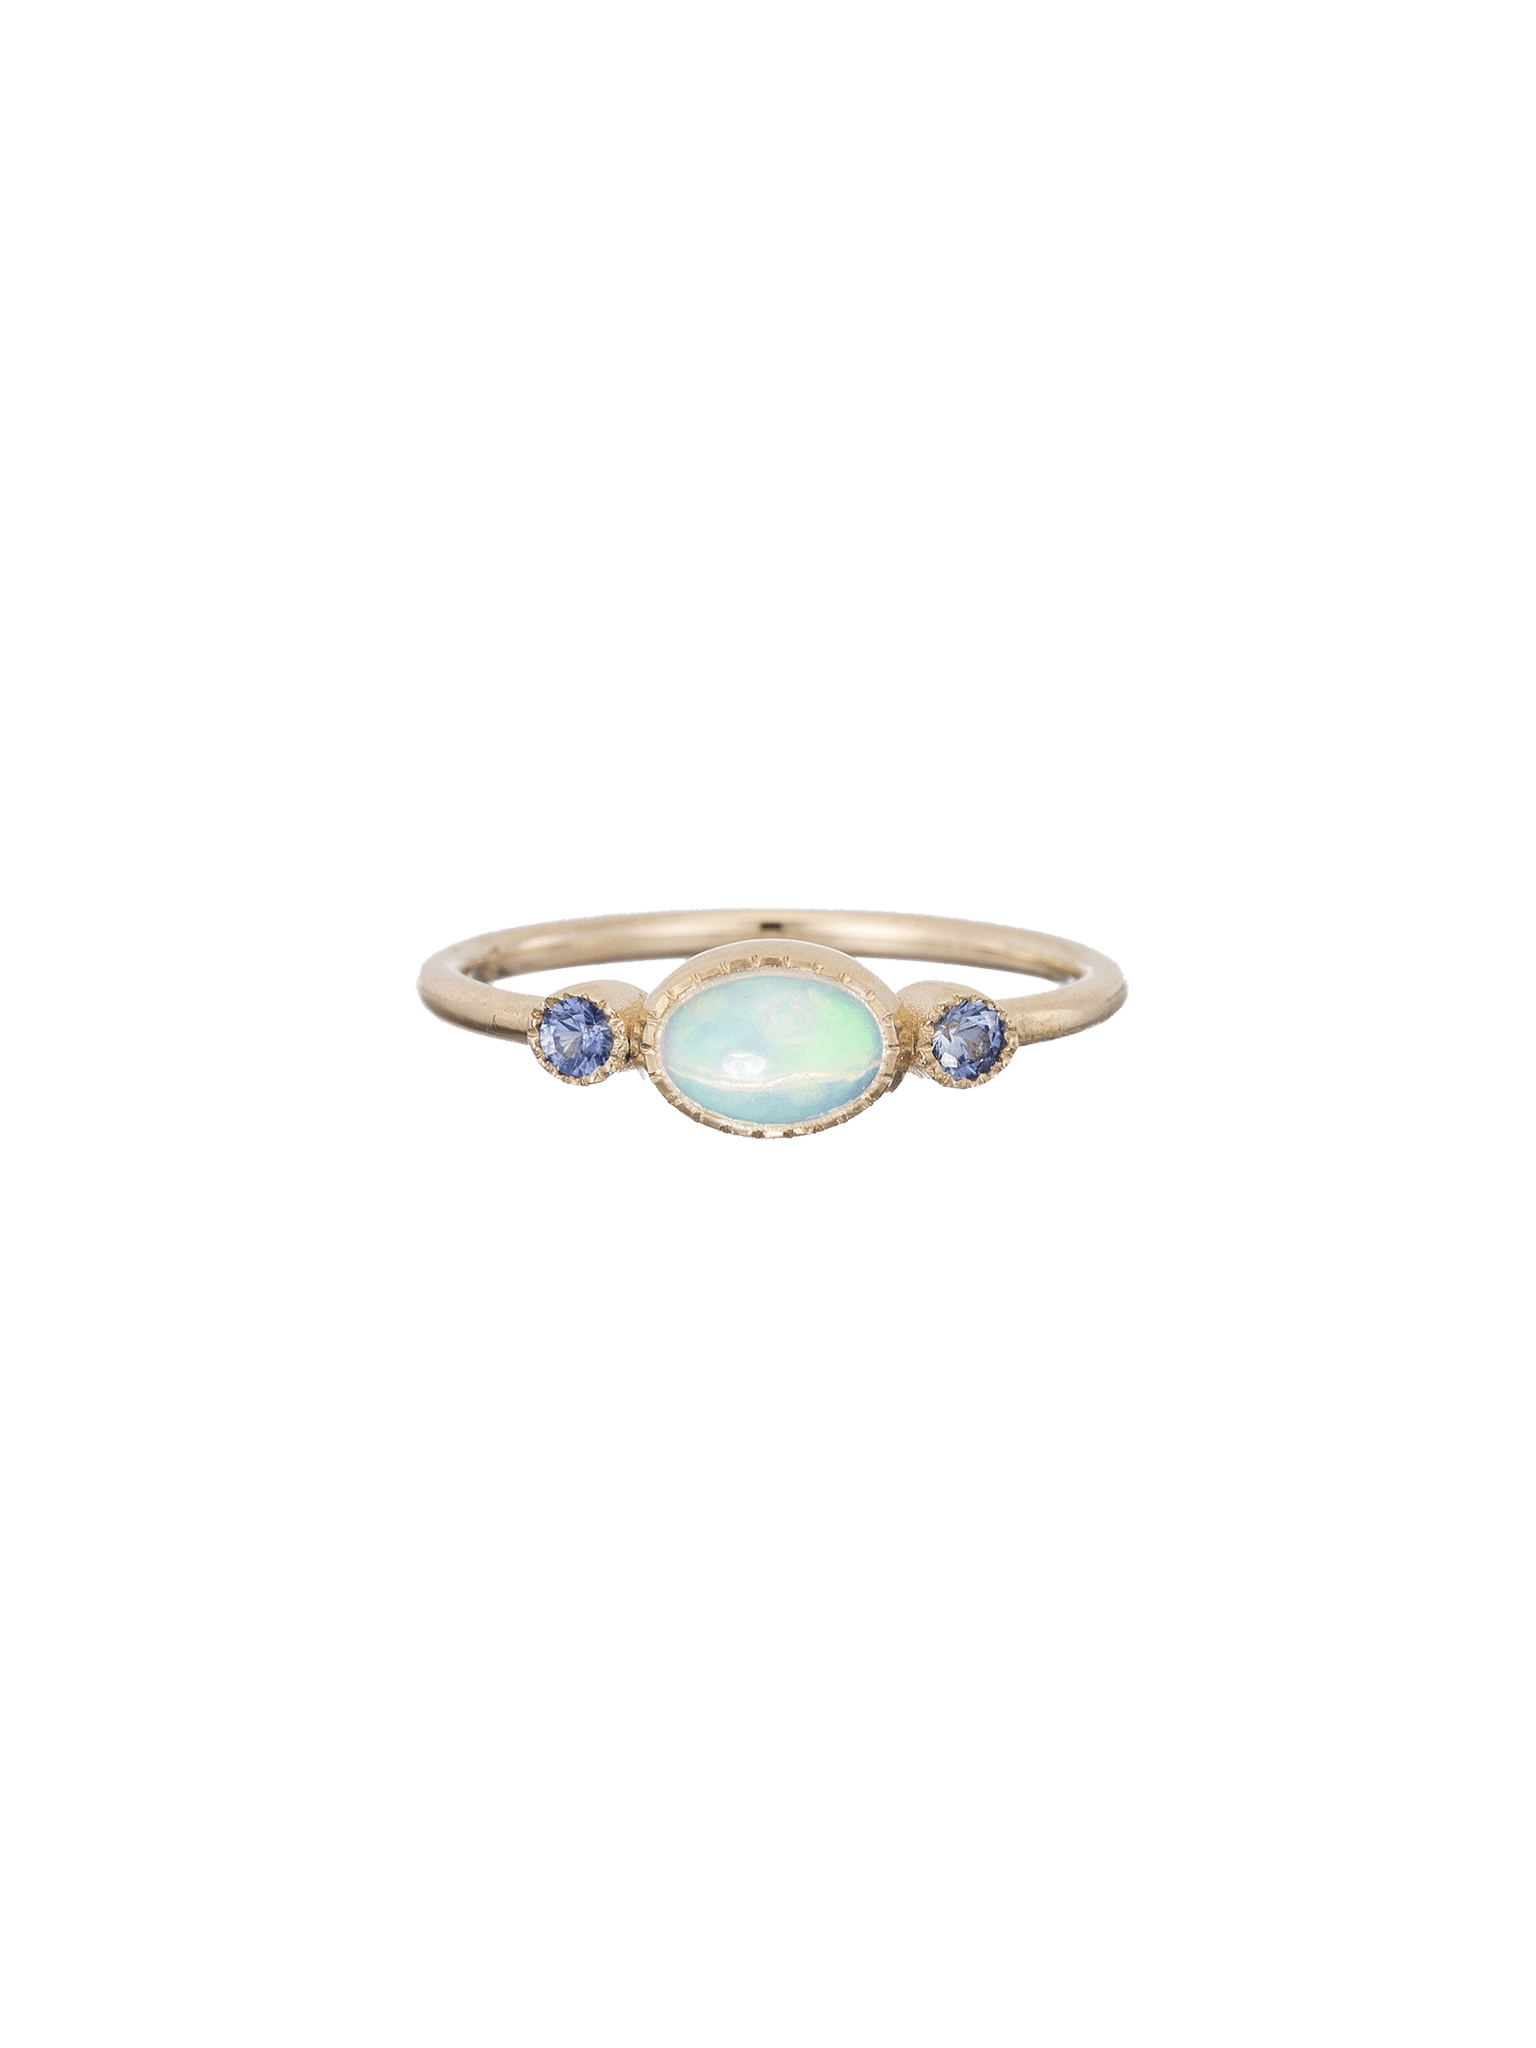 Sapphire opal reese ring by Jennie Kwon | Finematter